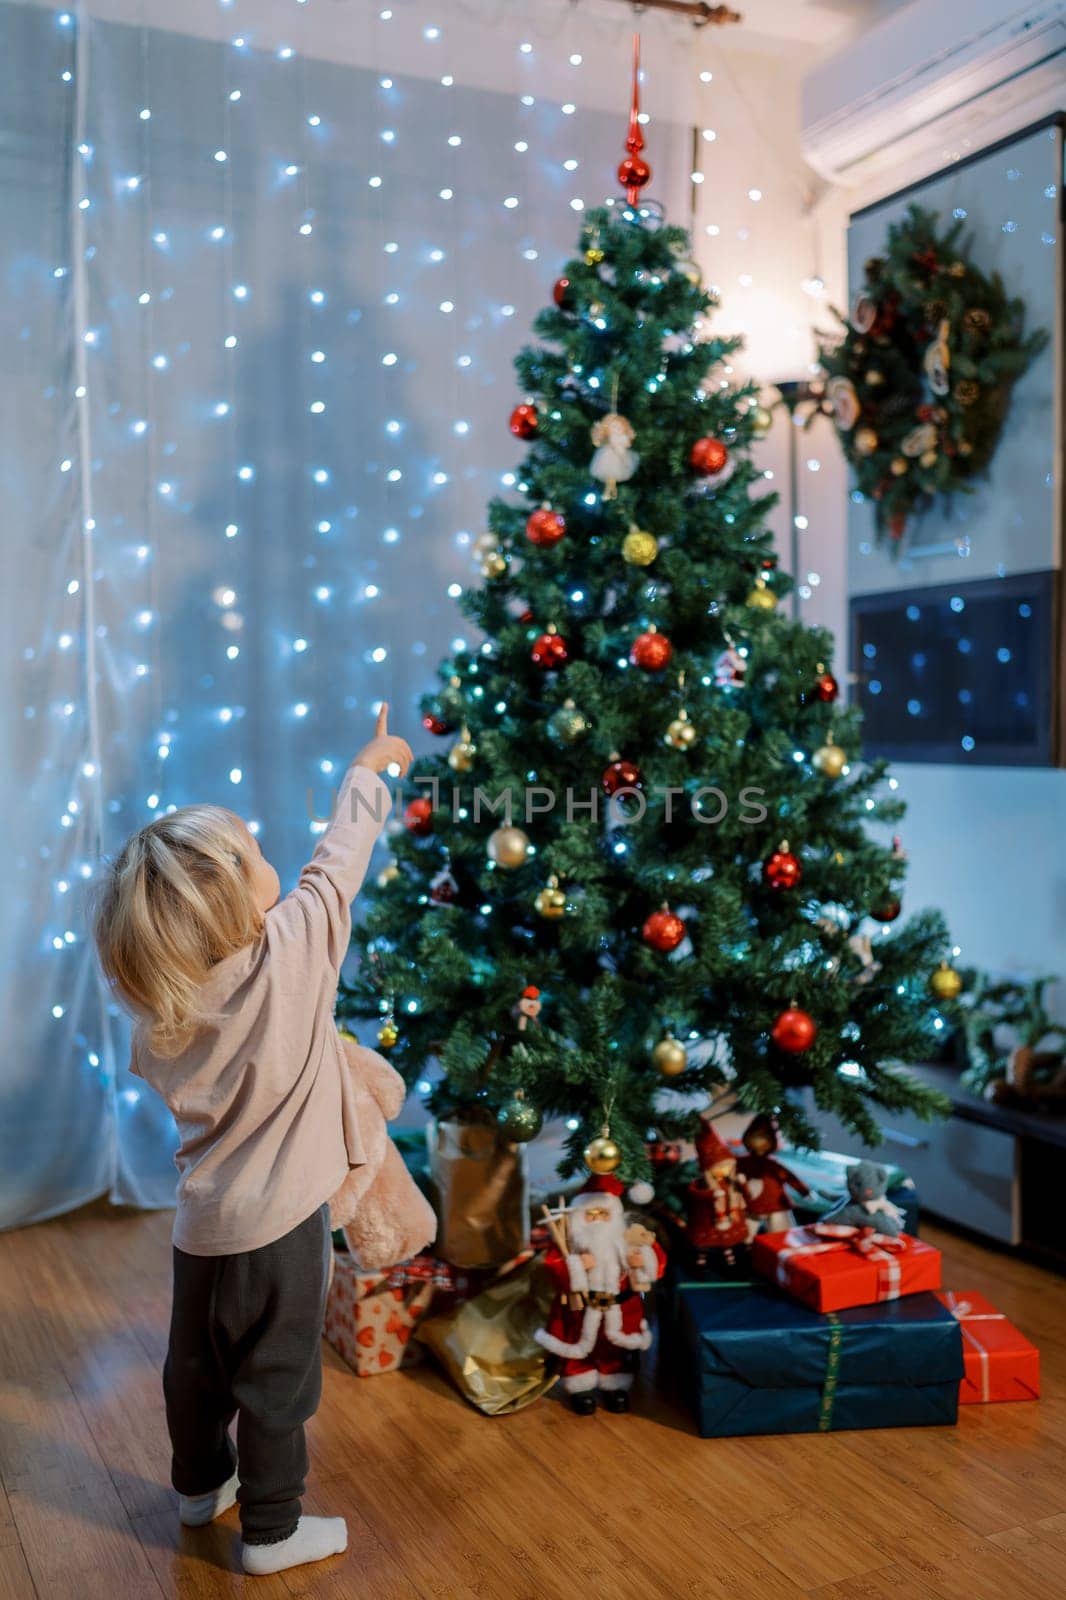 Little girl stands with a teddy bear near a decorated Christmas tree and points to the top. Back view. High quality photo